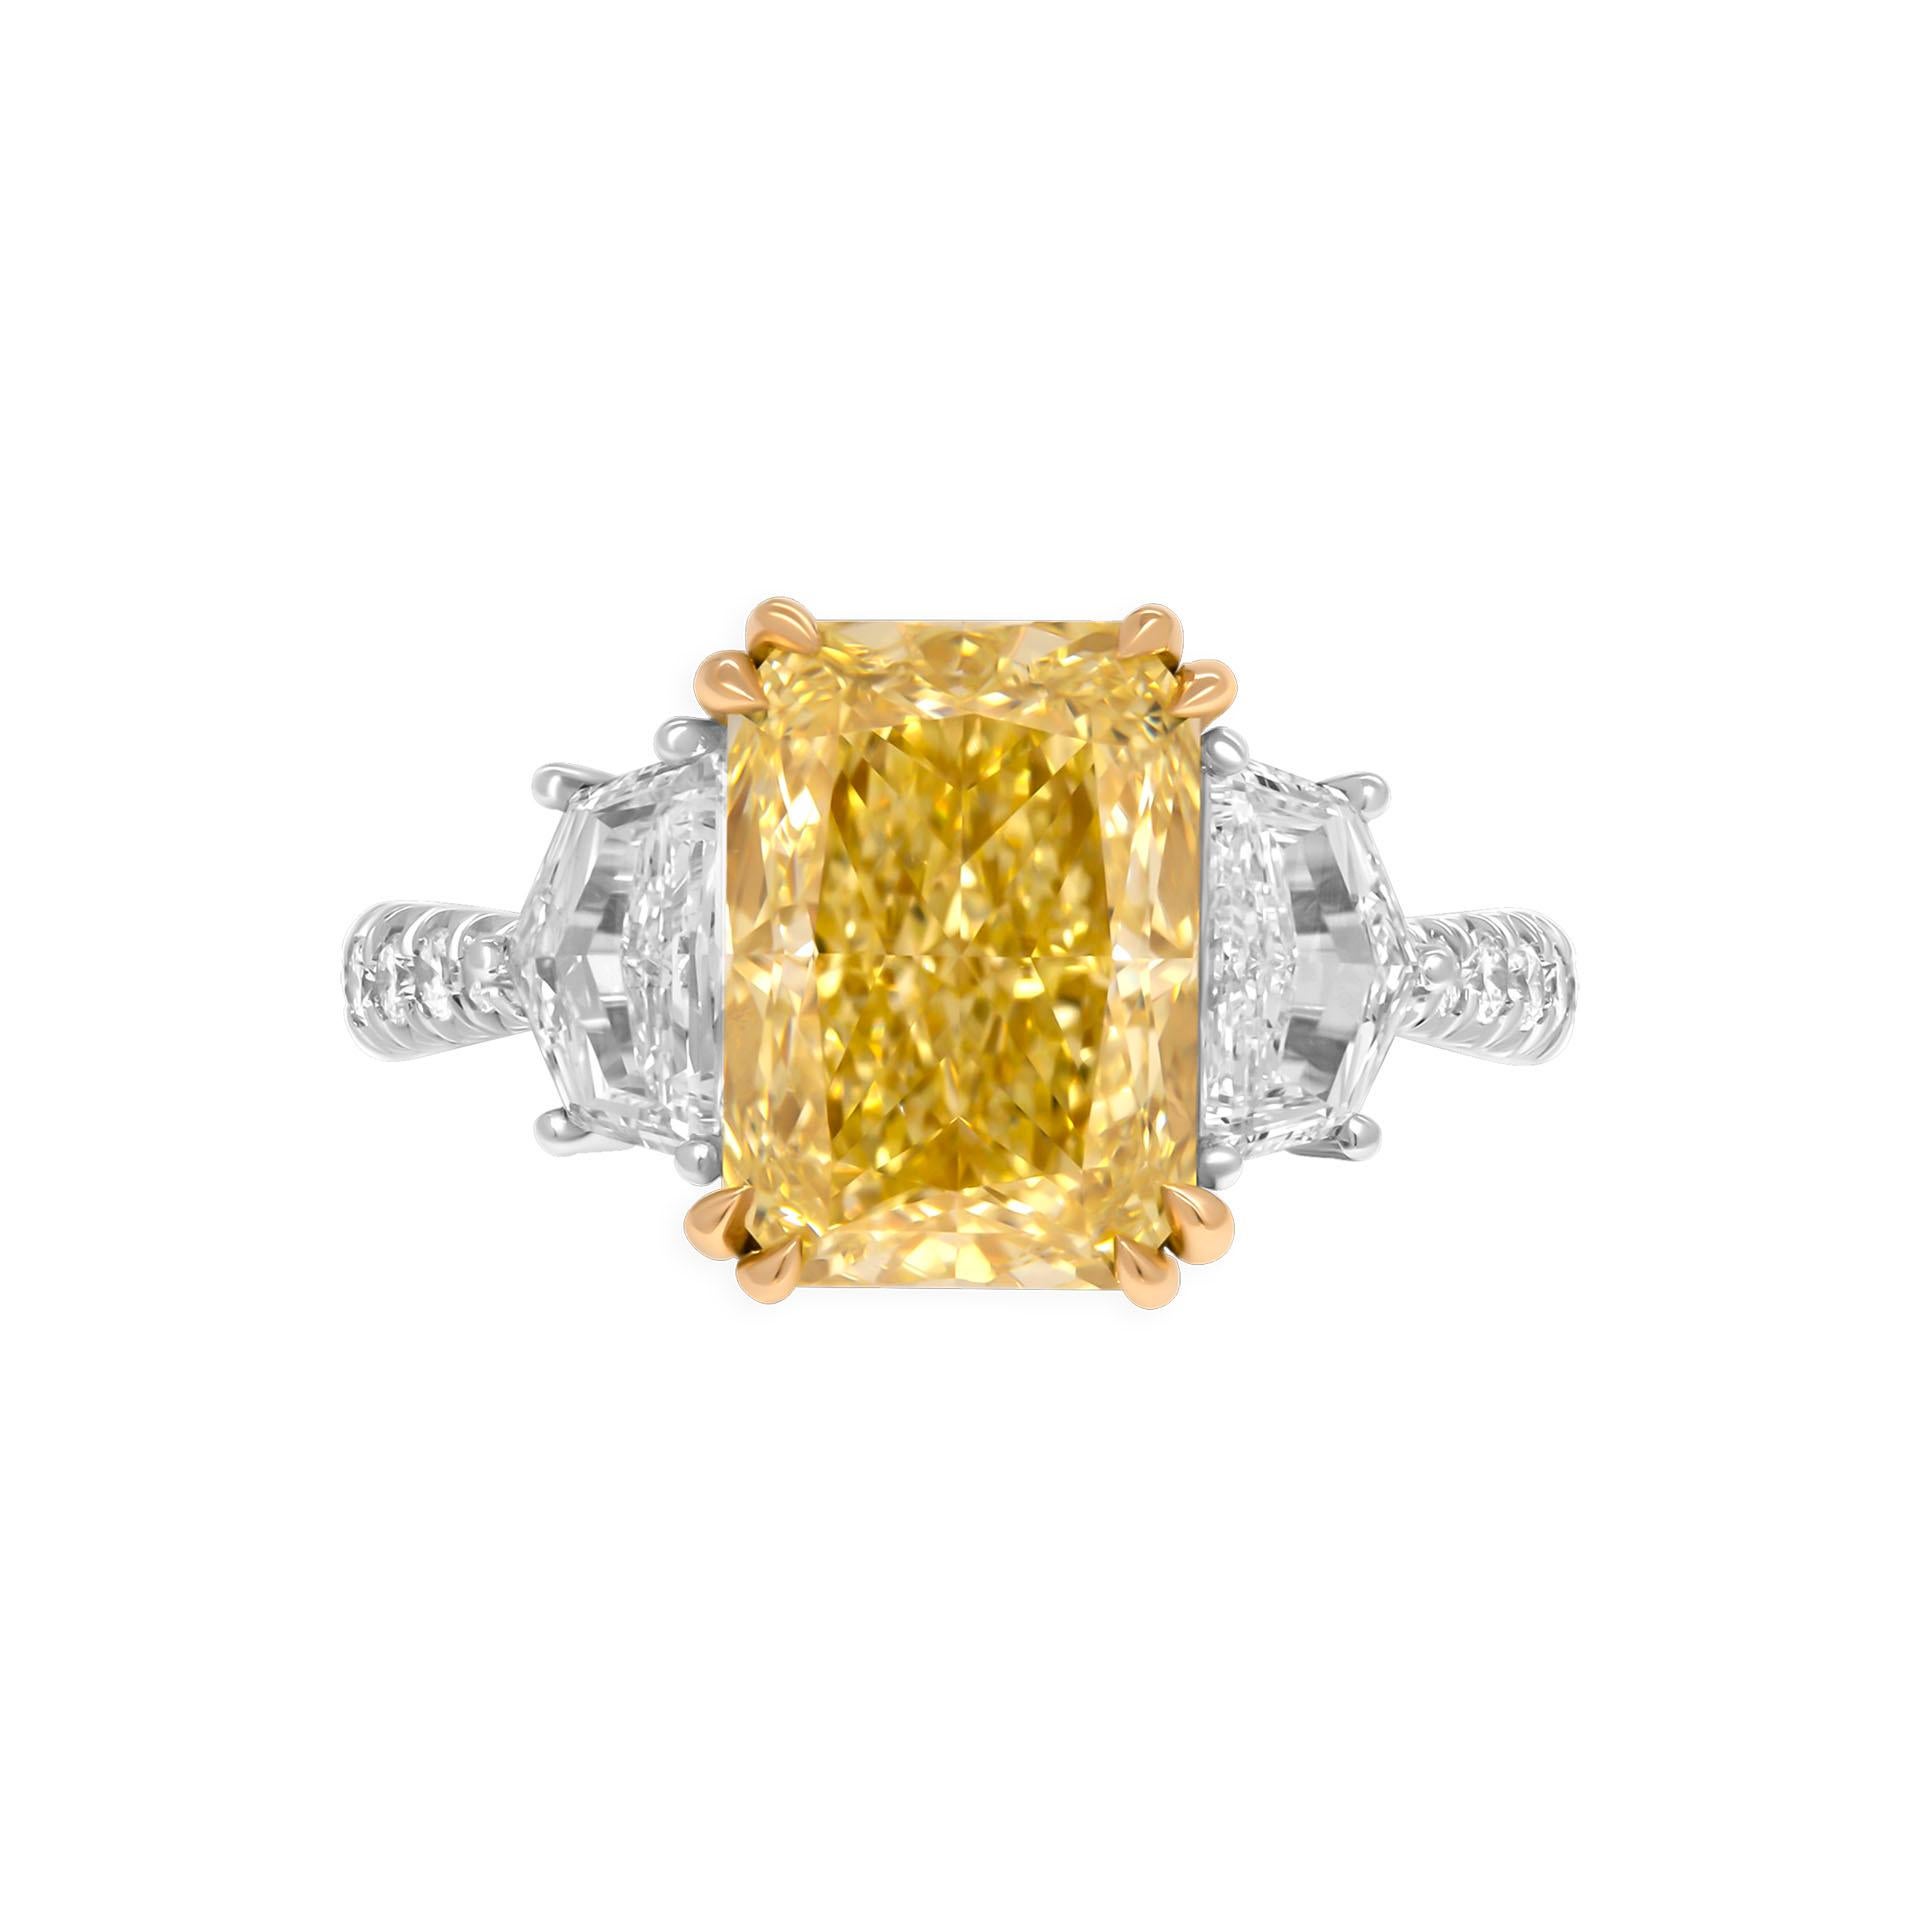 3 stone ring in Platinum & 18K Yellow Gold

Center stone: 4.02ct Natural Fancy Yellow Even VVS2 Radiant Shape Diamond GIA#2457008603 

Two side stones: 
0.50ct D VS1 Cadillac shape GIA#1413796012
0.40ct D VVS1 Cadillac shape